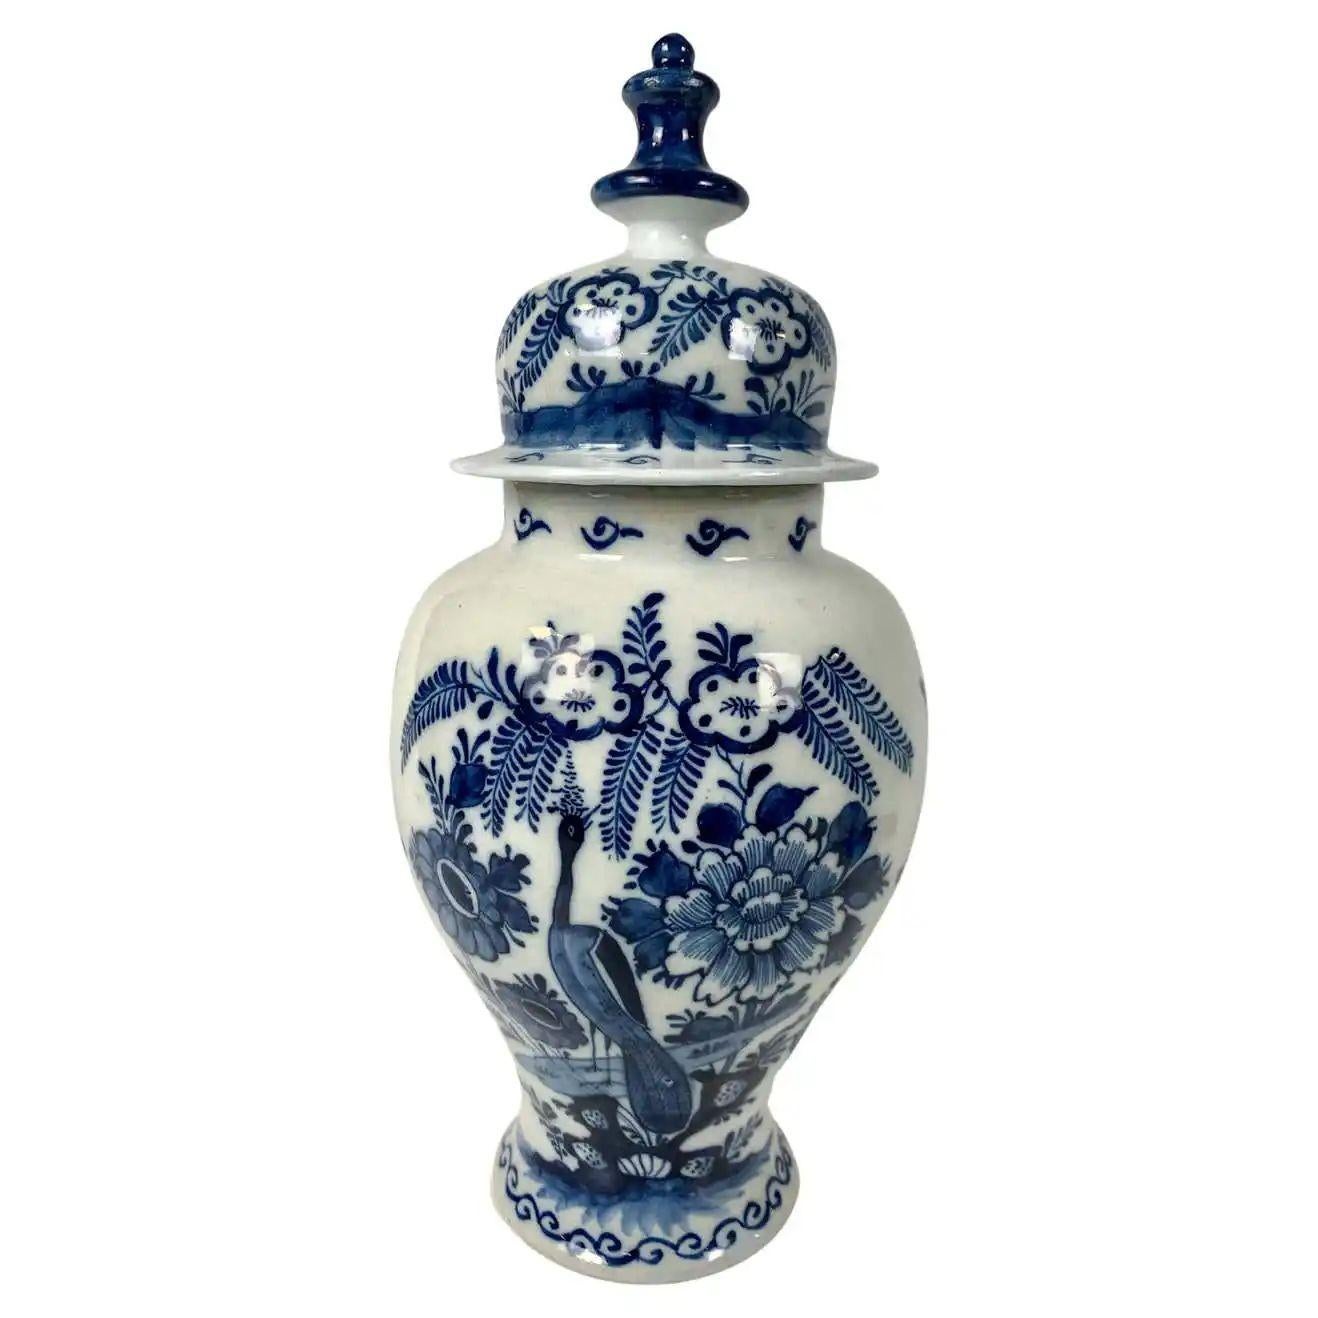 This is a group of blue and white Delft jars and vases and one carafe.
Made in the 18th century, each piece has its character.
Together, they form a gorgeous group.
Here are the details of each piece starting on the left:
1) A Blue and White Delft